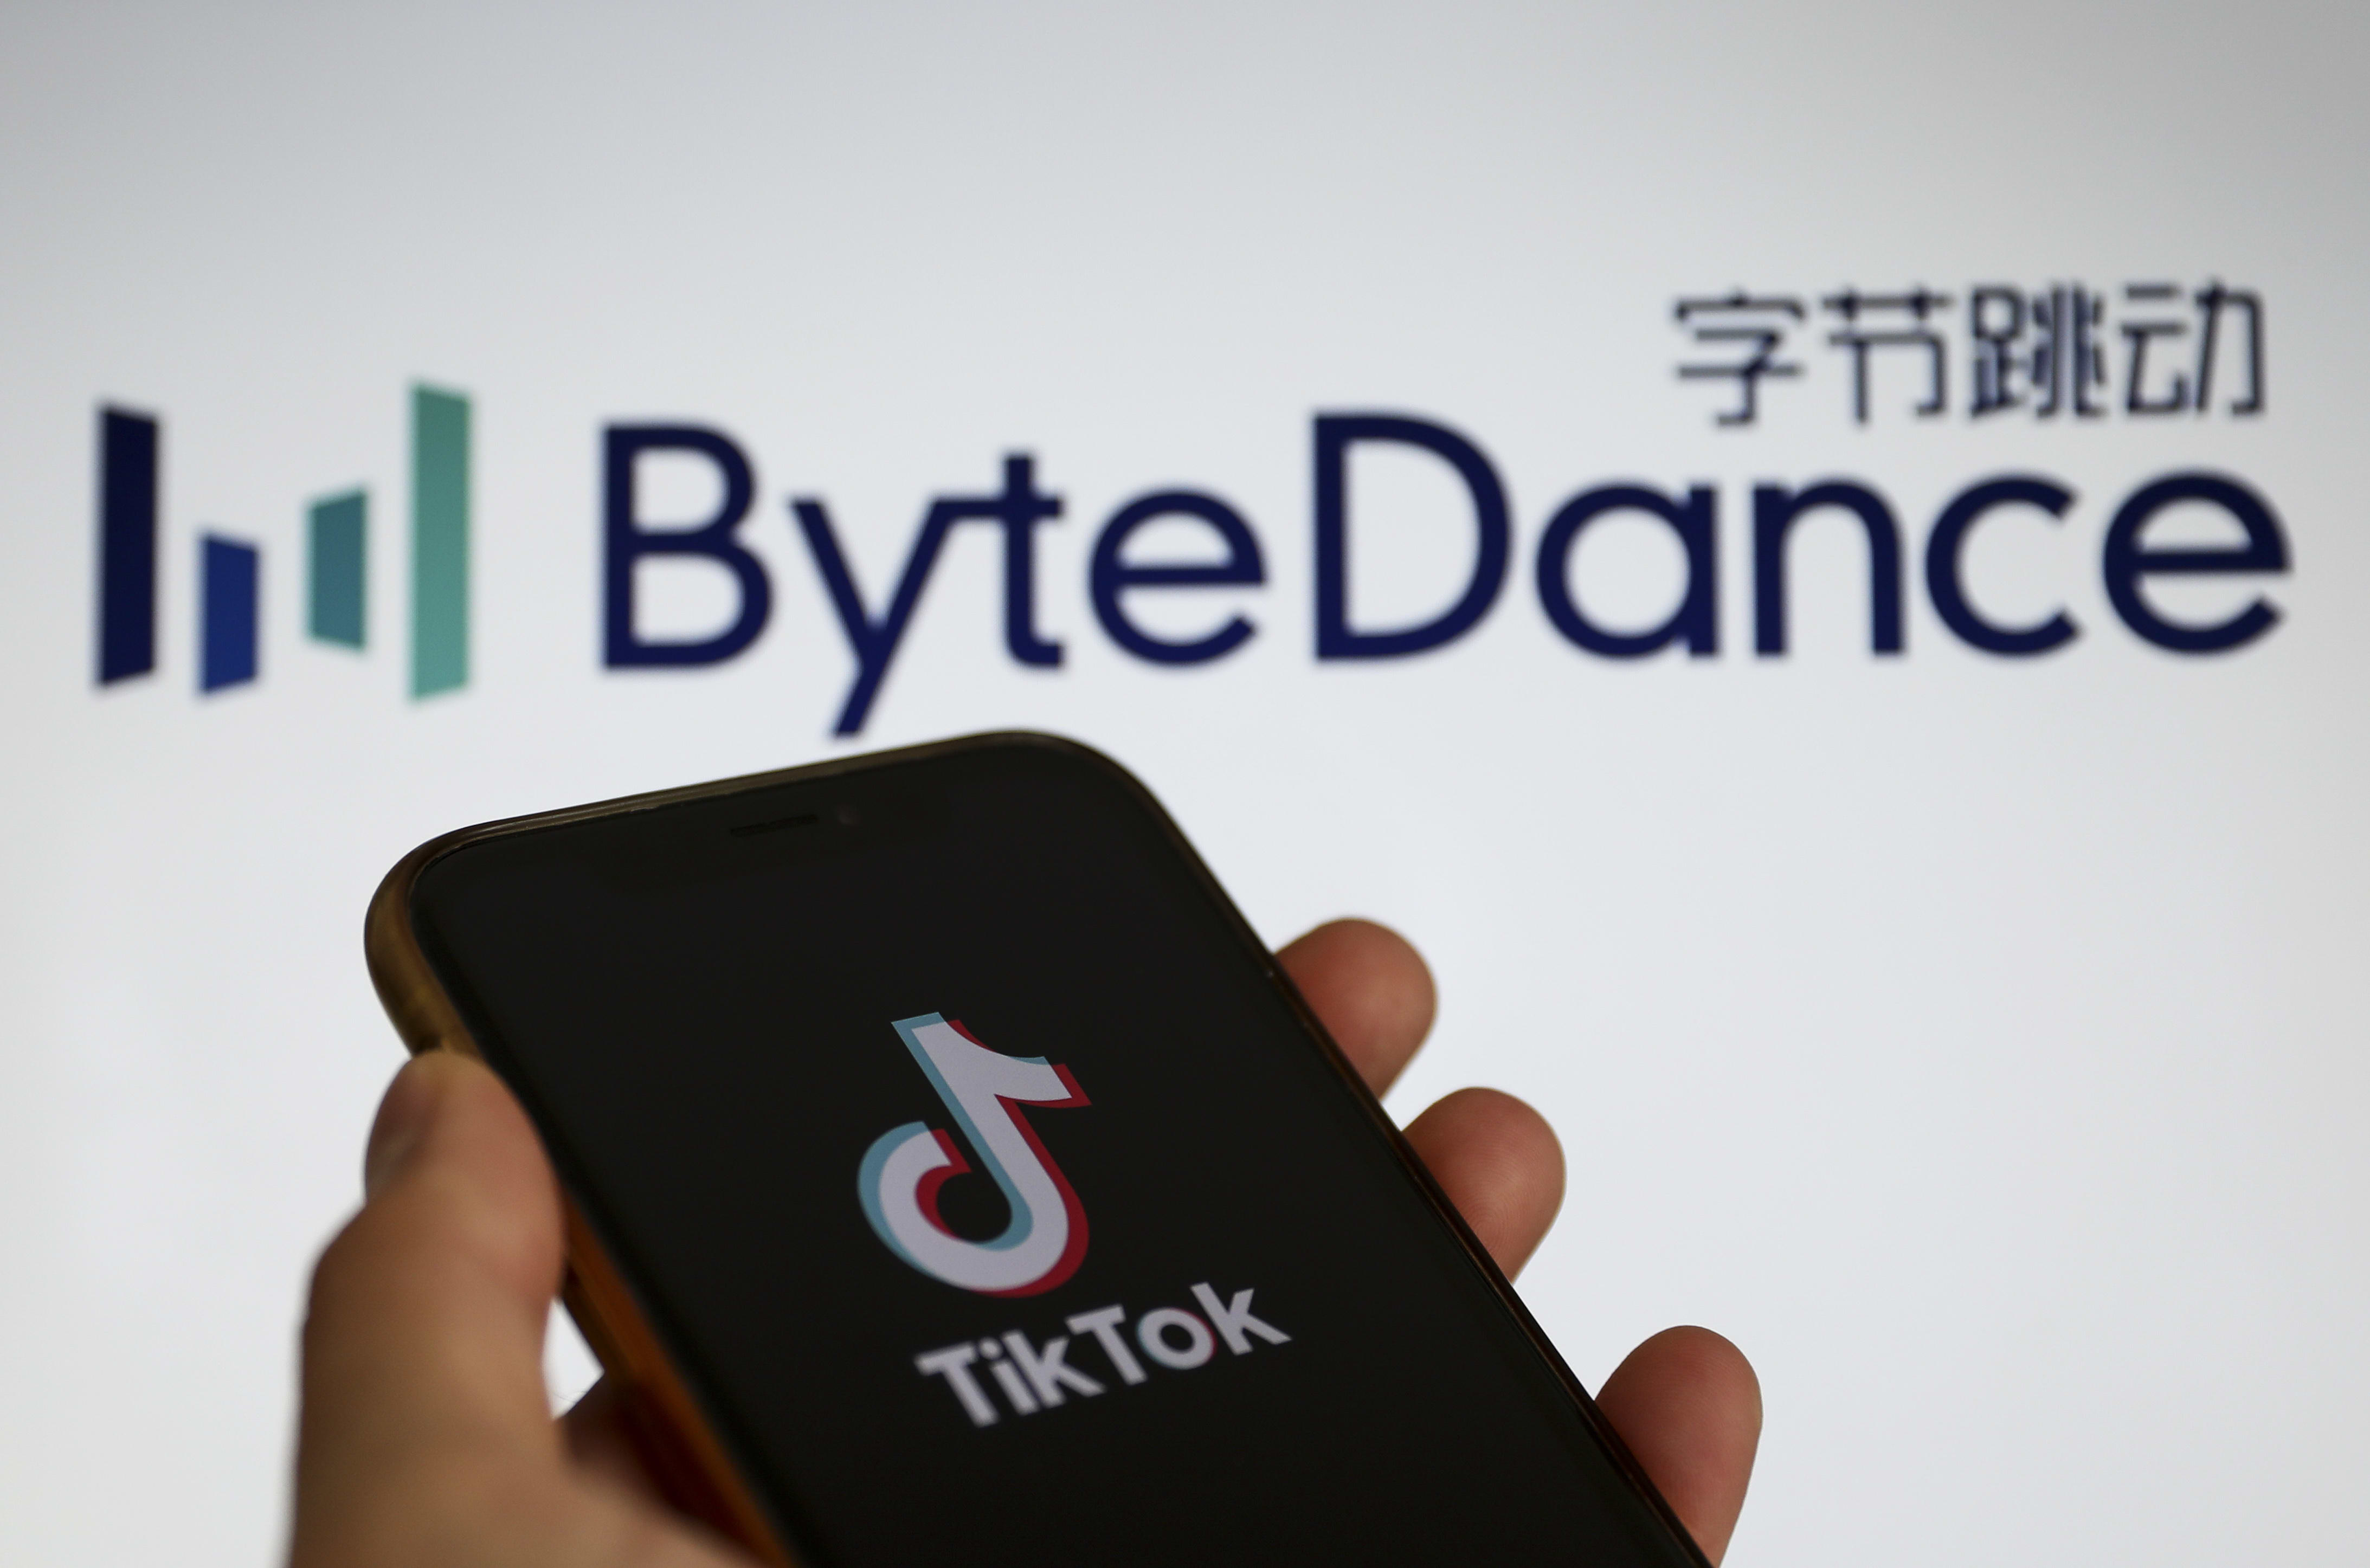 ByteDance takes over Tencent with the acquisition of a large game studio